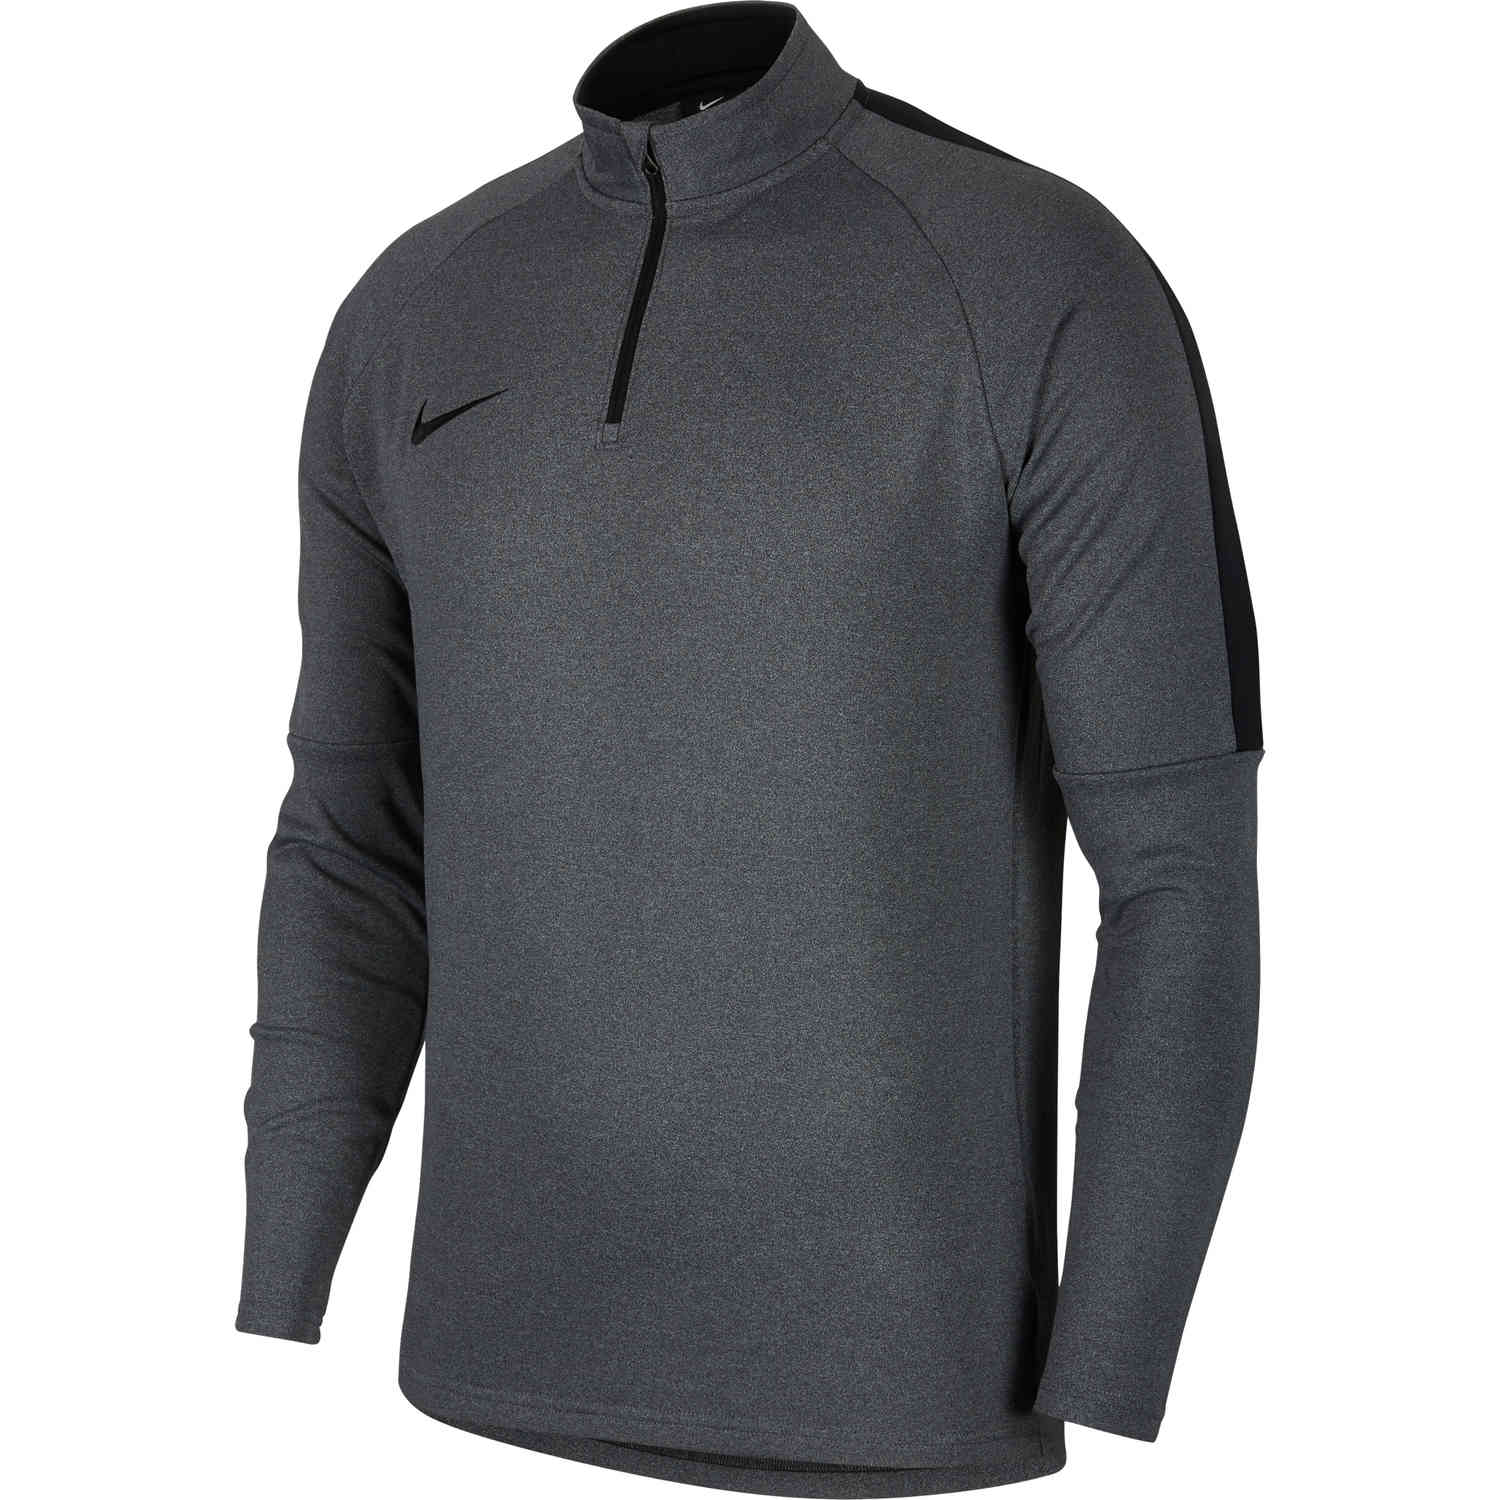 Nike Dry Academy Top Heather/Black Soccer Master